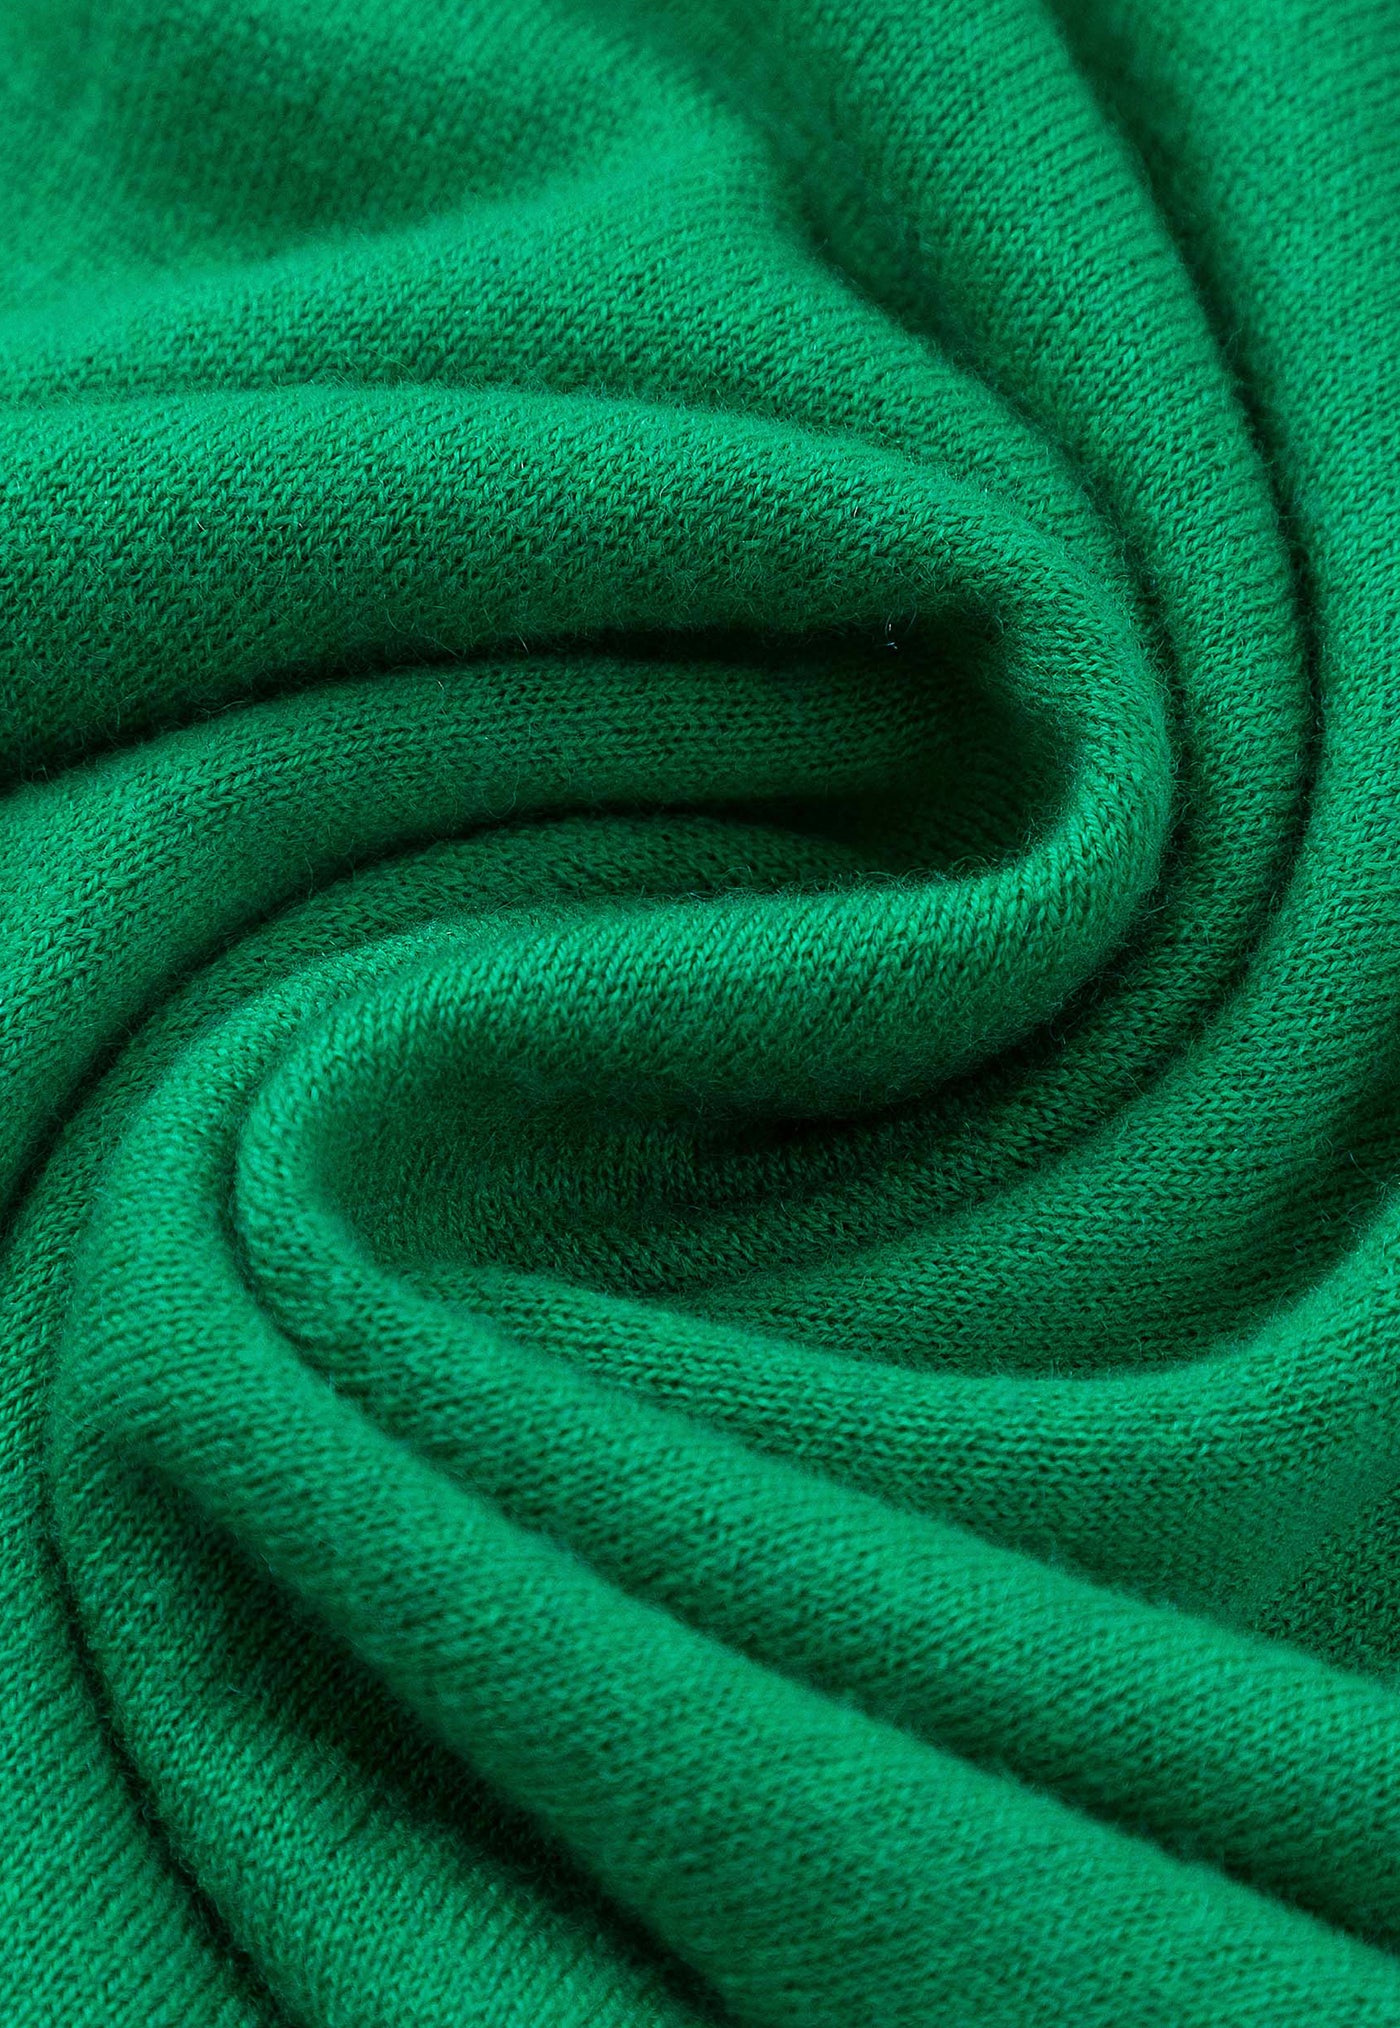 N.33 Wool/Cashmere Bell Sleeve Crew - Kelly Green sold by Angel Divine